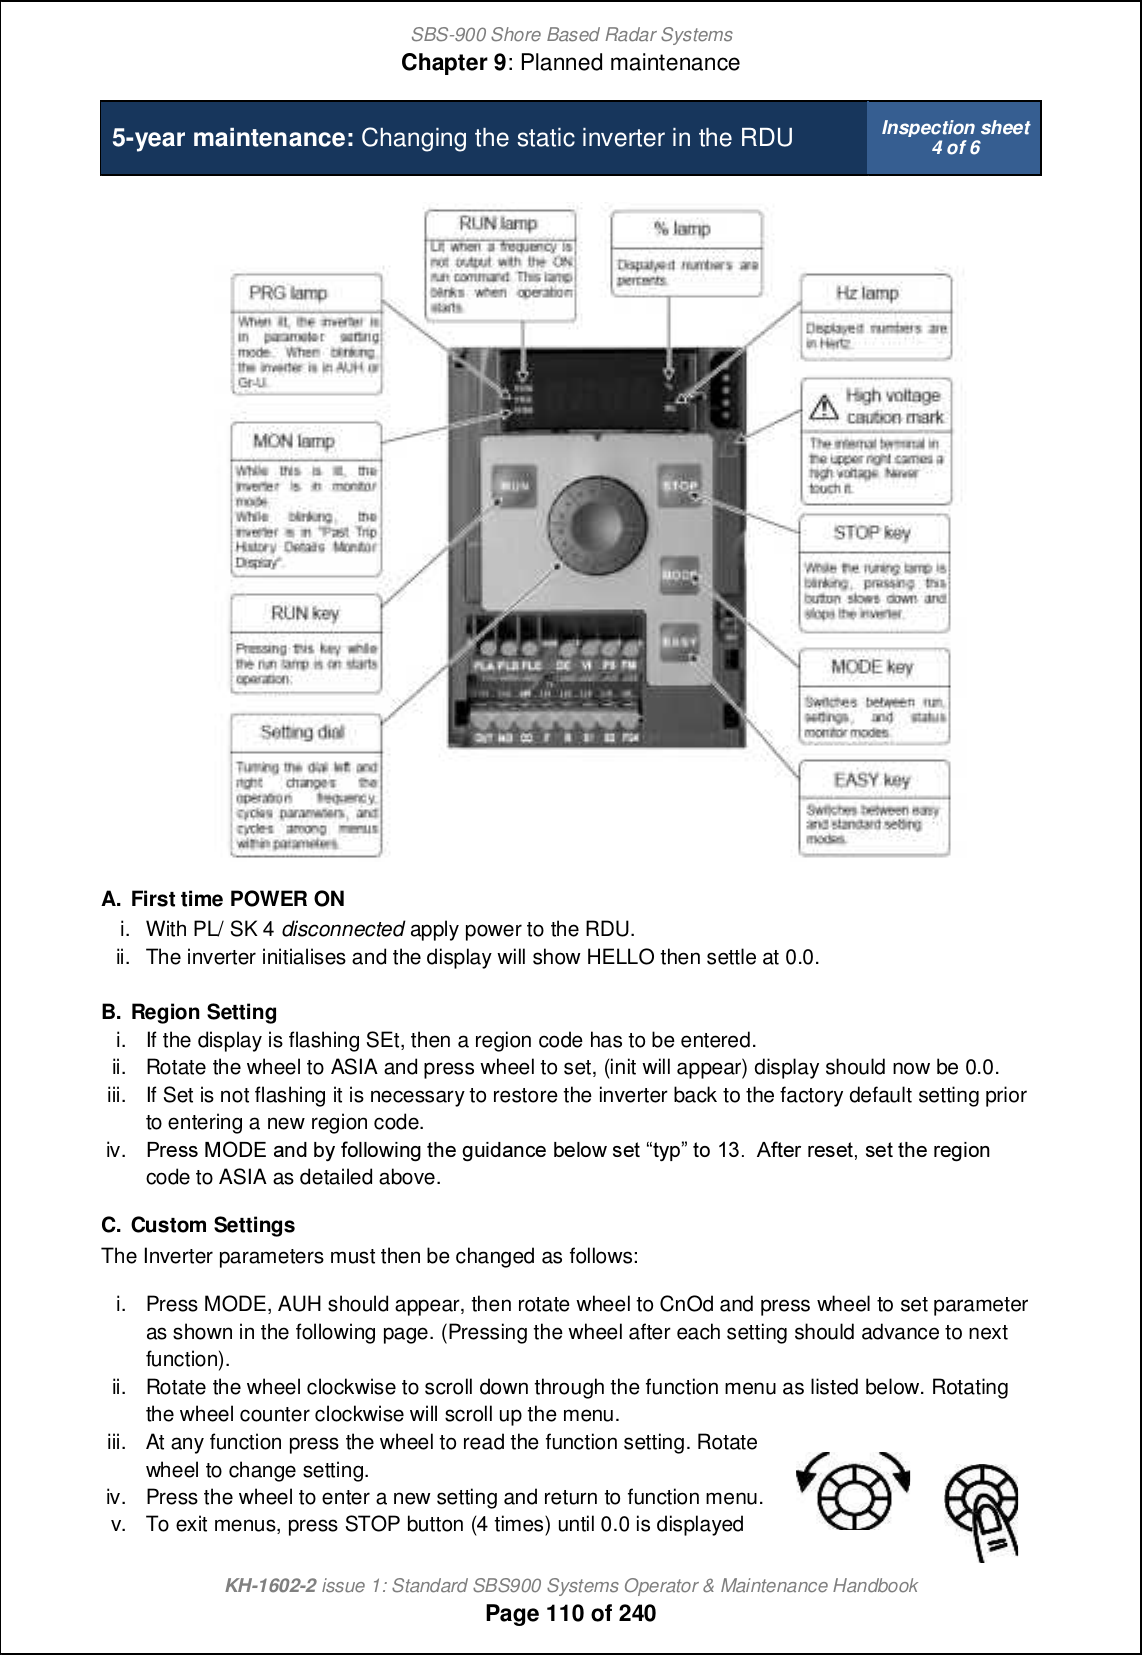 SBS-900 Shore Based Radar SystemsChapter 9: Planned maintenanceKH-1602-2 issue 1: Standard SBS900 Systems Operator &amp; Maintenance HandbookPage 110 of 2405-year maintenance: Changing the static inverter in the RDU Inspection sheet4 of 6A. First time POWER ONi. With PL/ SK 4 disconnected apply power to the RDU.ii. The inverter initialises and the display will show HELLO then settle at 0.0.B. Region Settingi. If the display is flashing SEt, then a region code has to be entered.ii. Rotate the wheel to ASIA and press wheel to set, (init will appear) display should now be 0.0.iii. If Set is not flashing it is necessary to restore the inverter back to the factory default setting priorto entering a new region code.iv. Ol_mm LNCD [h^ \s `iffiqcha nb_ aoc^[h]_ \_fiq m_n nsj ni 02-  @`n_l l_m_n+ m_n nb_ l_acih code to ASIA as detailed above.C. Custom SettingsThe Inverter parameters must then be changed as follows:i. Press MODE, AUH should appear, then rotate wheel to CnOd and press wheel to set parameteras shown in the following page. (Pressing the wheel after each setting should advance to nextfunction).ii. Rotate the wheel clockwise to scroll down through the function menu as listed below. Rotatingthe wheel counter clockwise will scroll up the menu.iii. At any function press the wheel to read the function setting. Rotatewheel to change setting.iv. Press the wheel to enter a new setting and return to function menu.v. To exit menus, press STOP button (4 times) until 0.0 is displayed